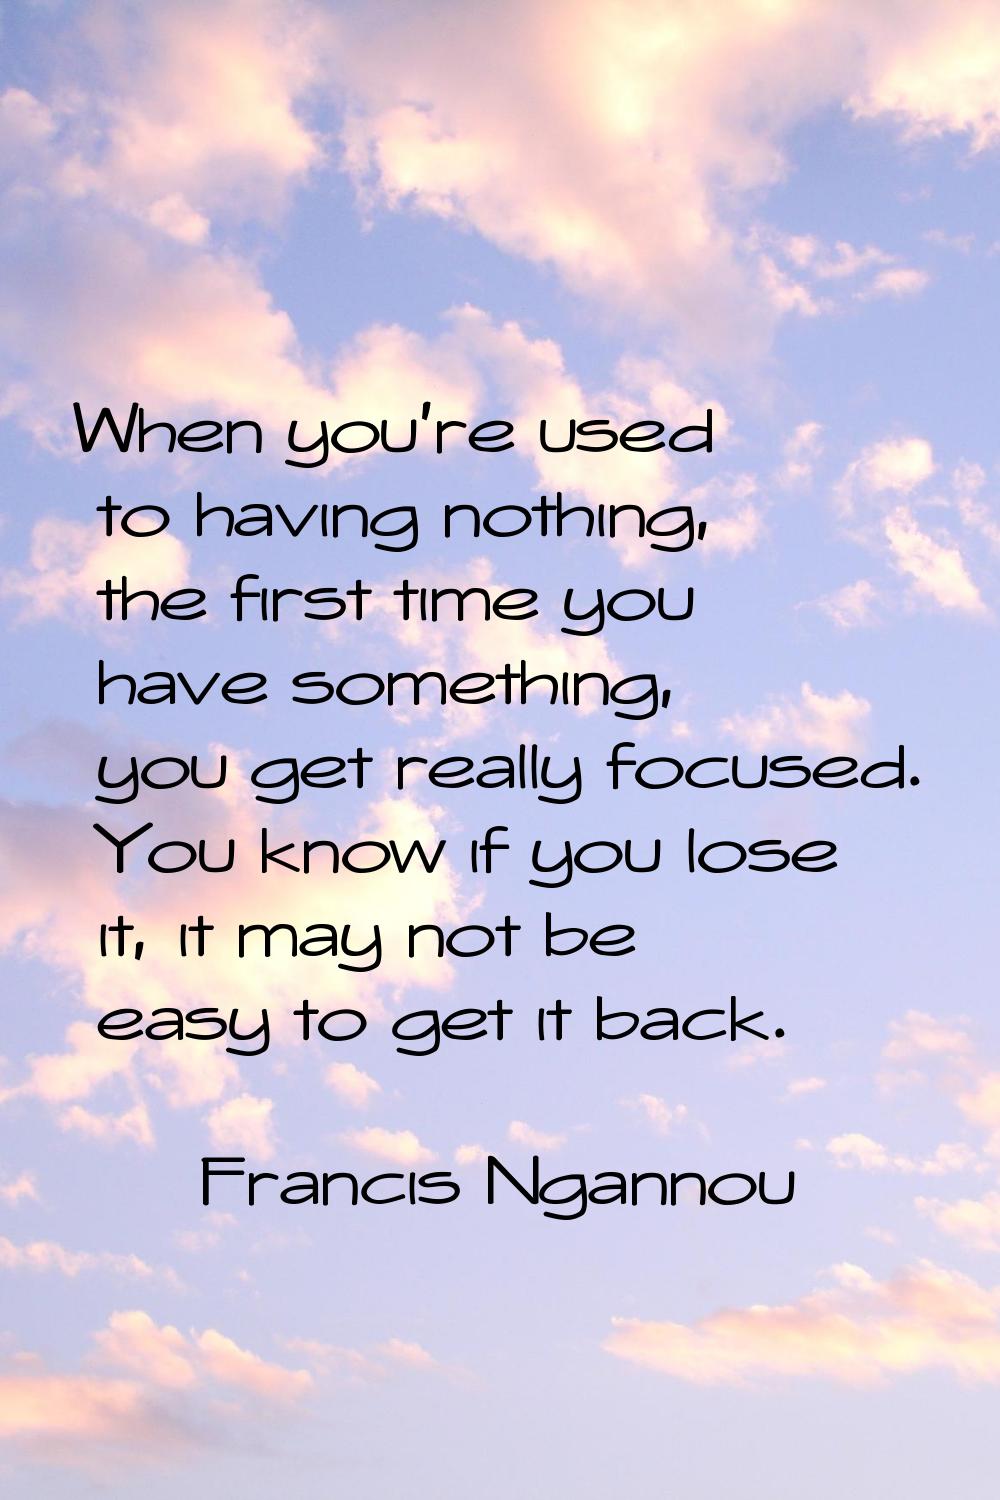 When you're used to having nothing, the first time you have something, you get really focused. You 